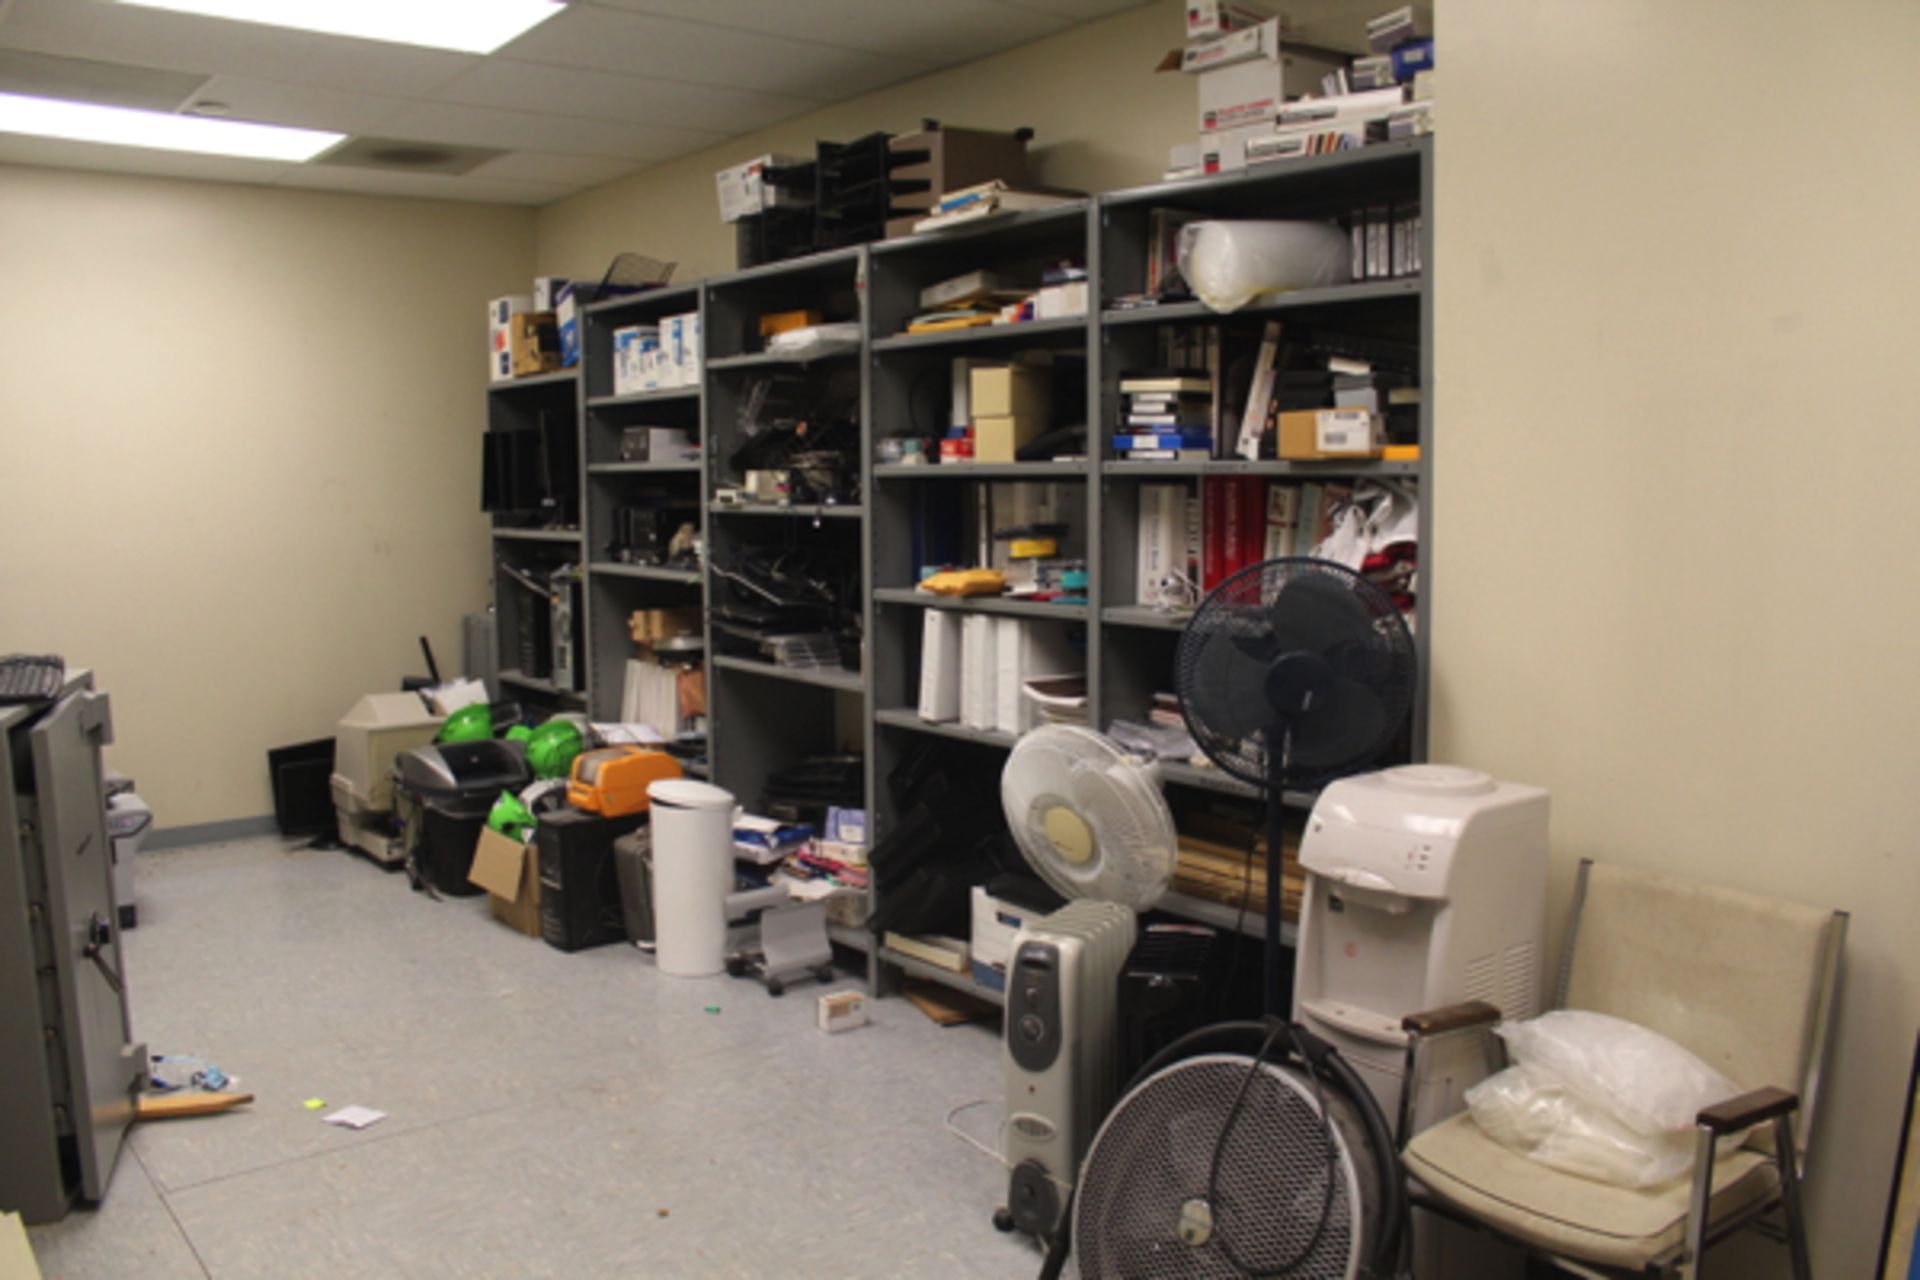 Contents of Office Supply Storage | Location: Administration Building - Image 2 of 4